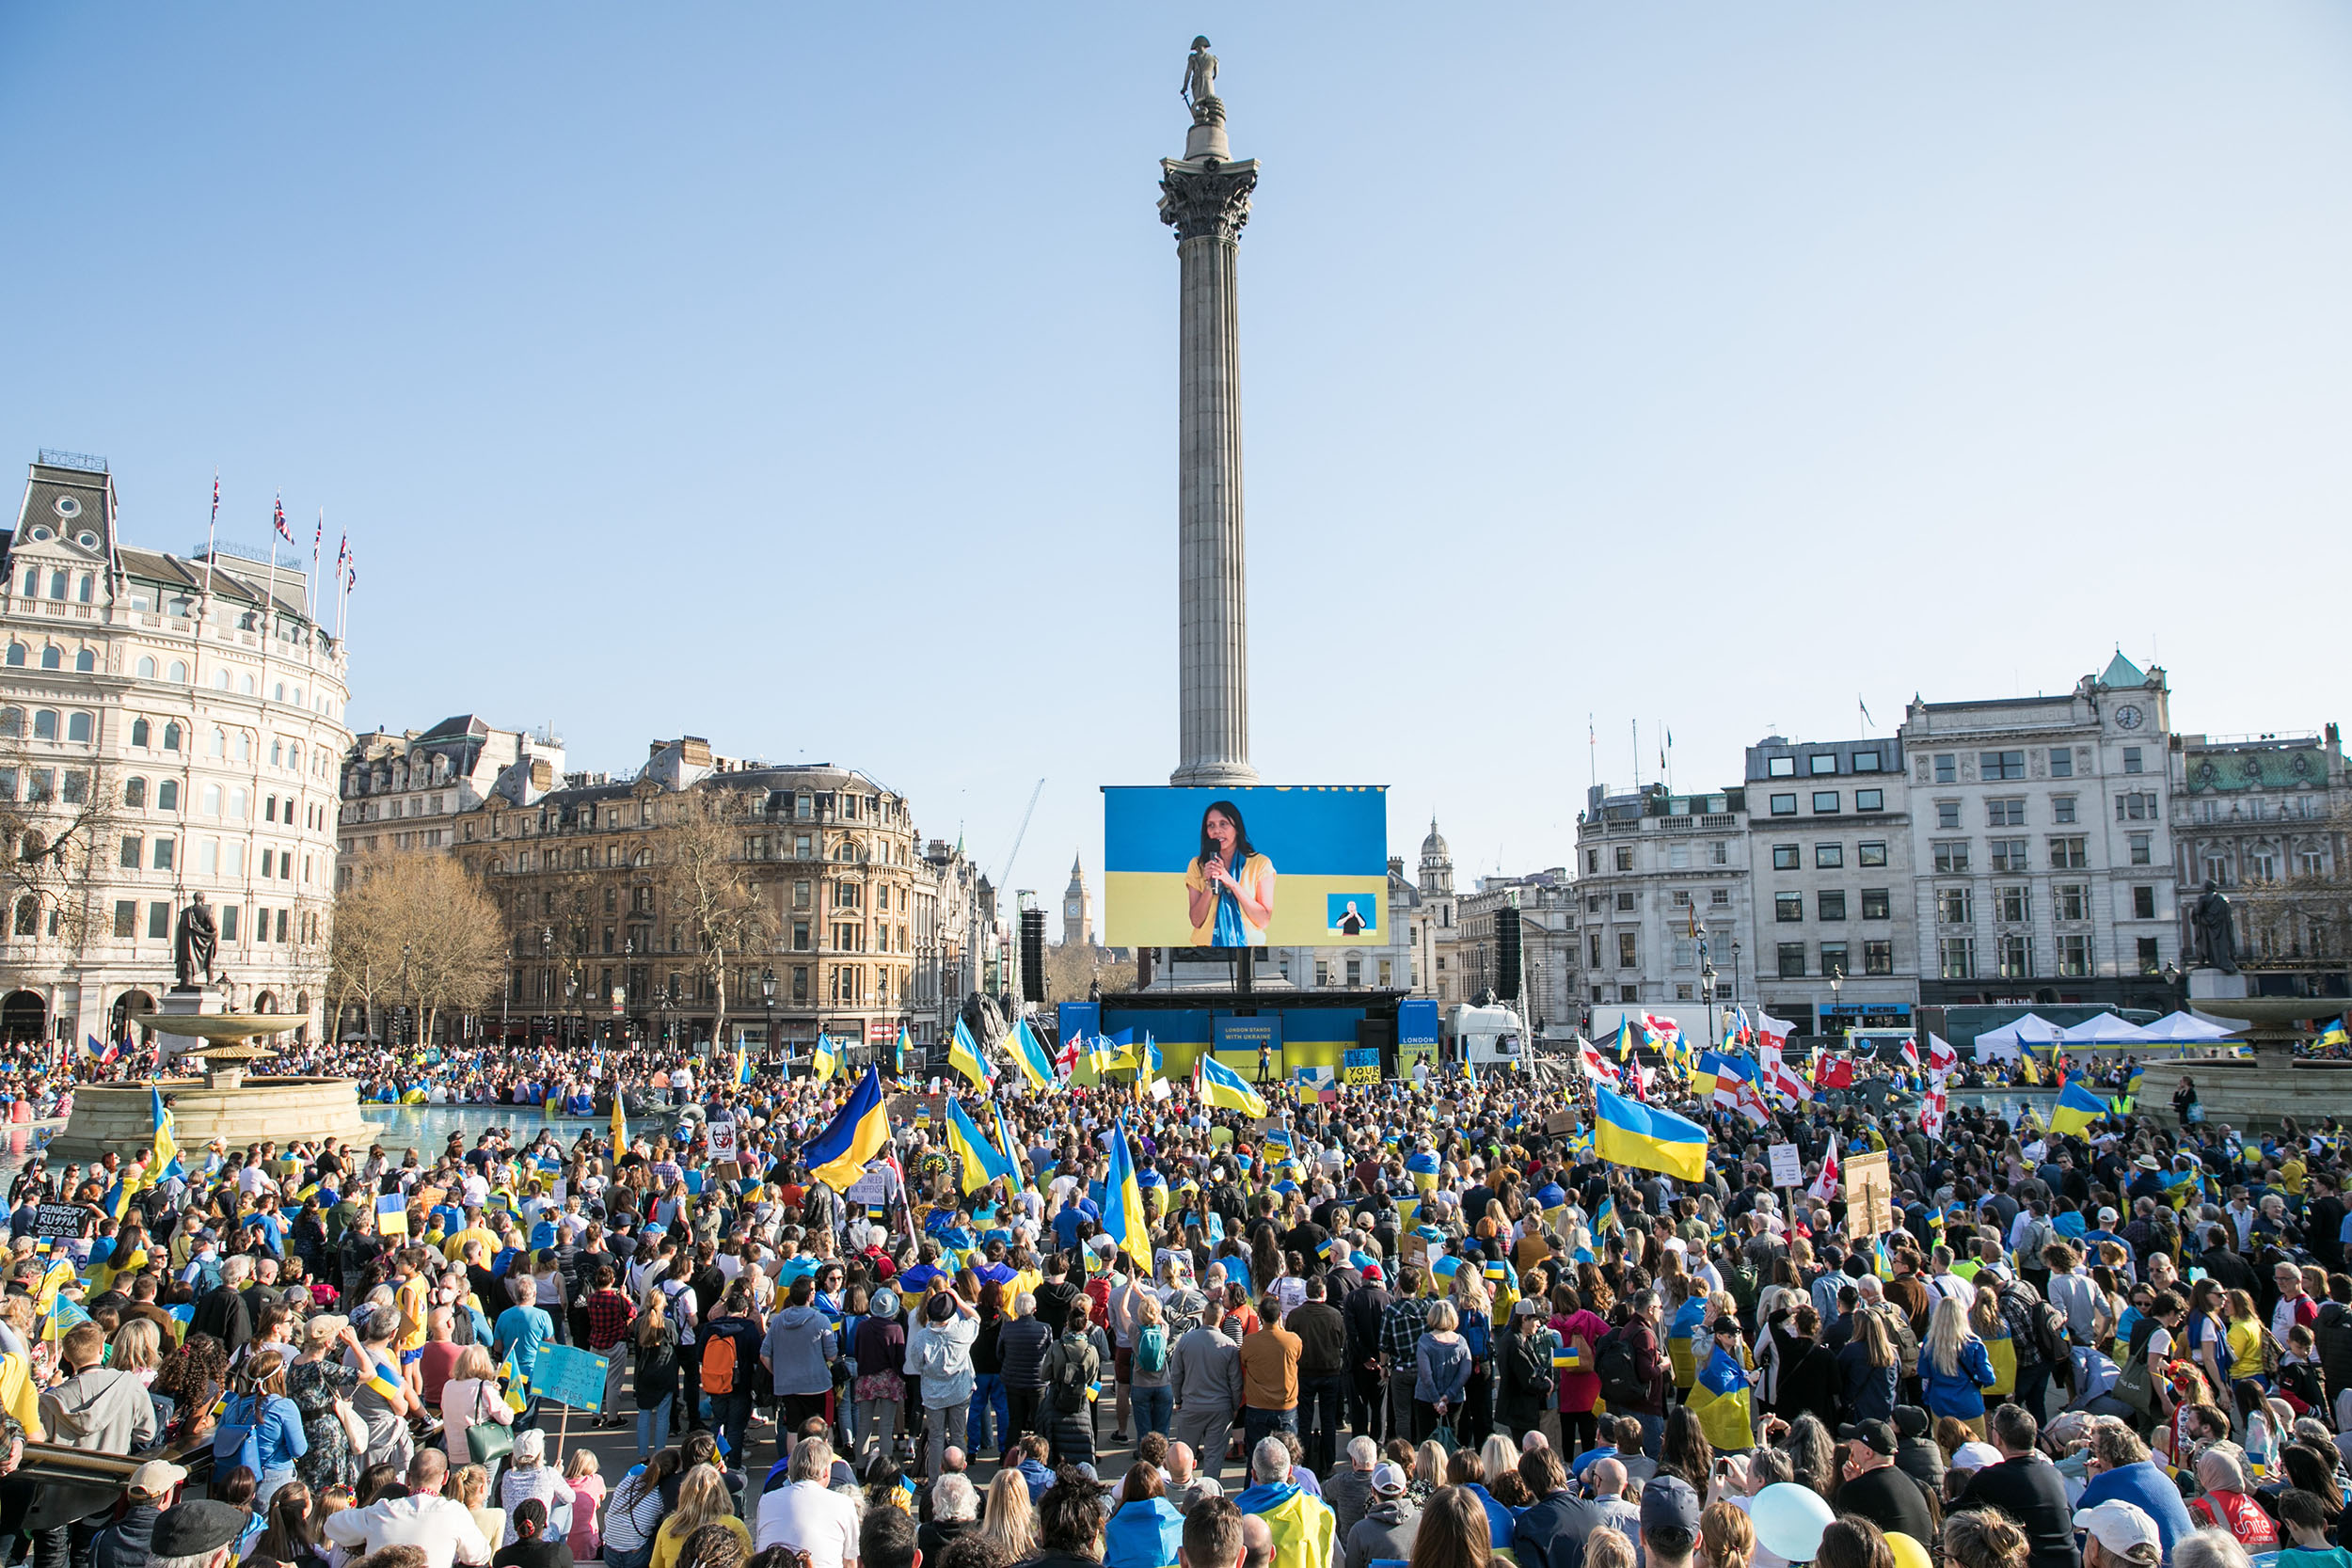 A large crowd gathers in central London to hear Halima Begum's speech. Her face is broadcast to the crowd on a large screen above the stage.A large crowd gathers in central London to hear Halima Begum's speech. Her face is broadcast to the crowd on a large screen above the stage.